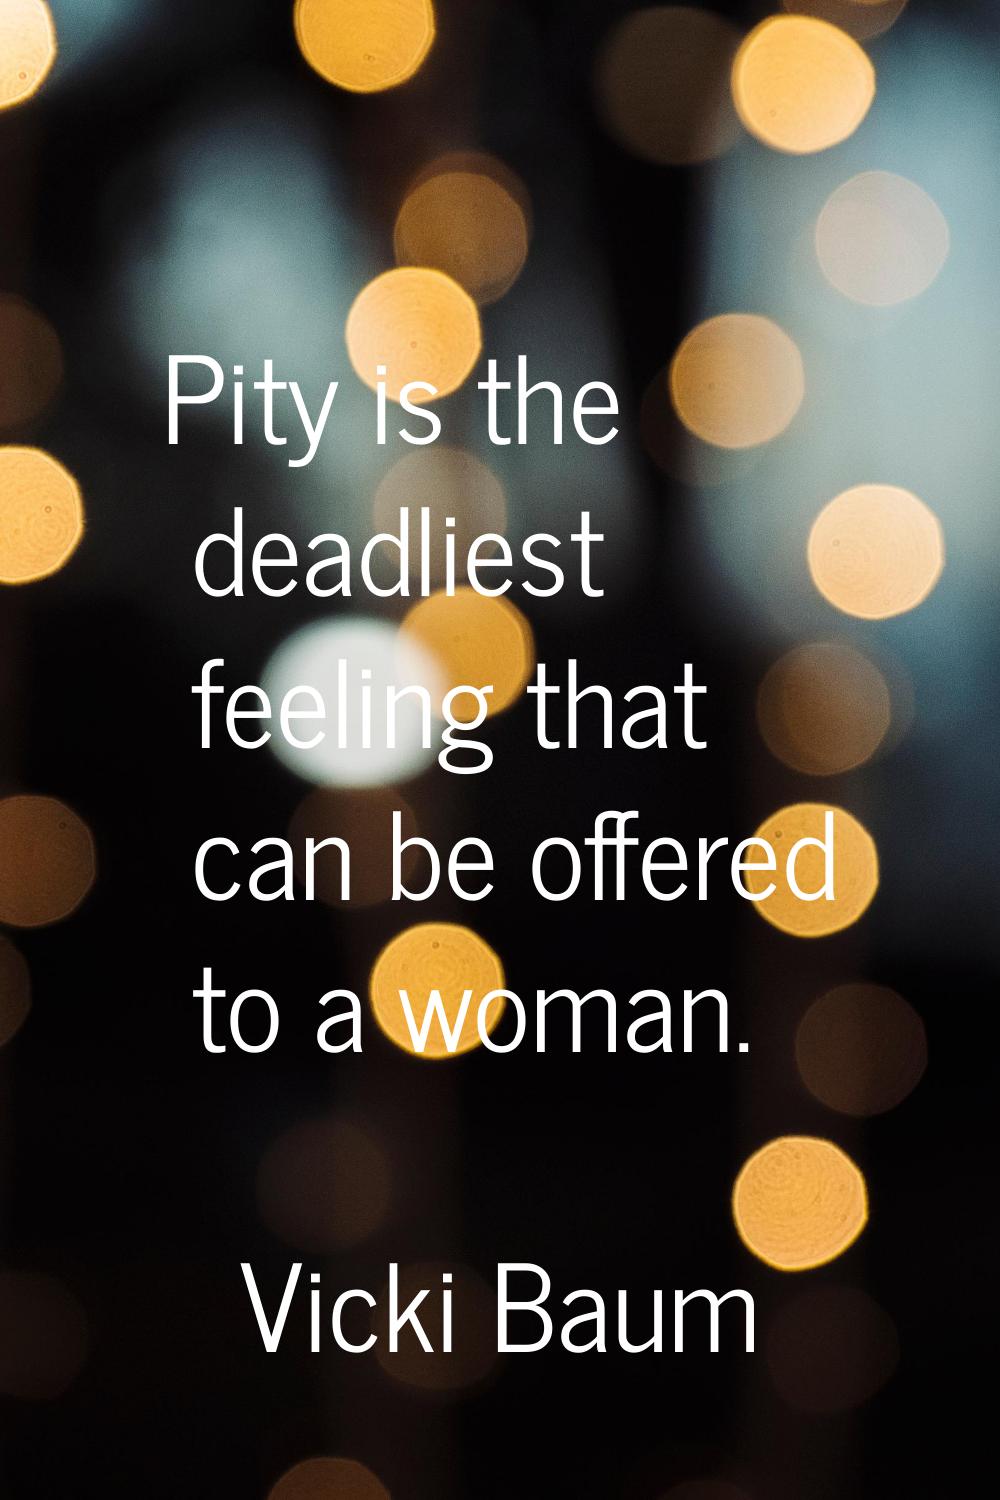 Pity is the deadliest feeling that can be offered to a woman.